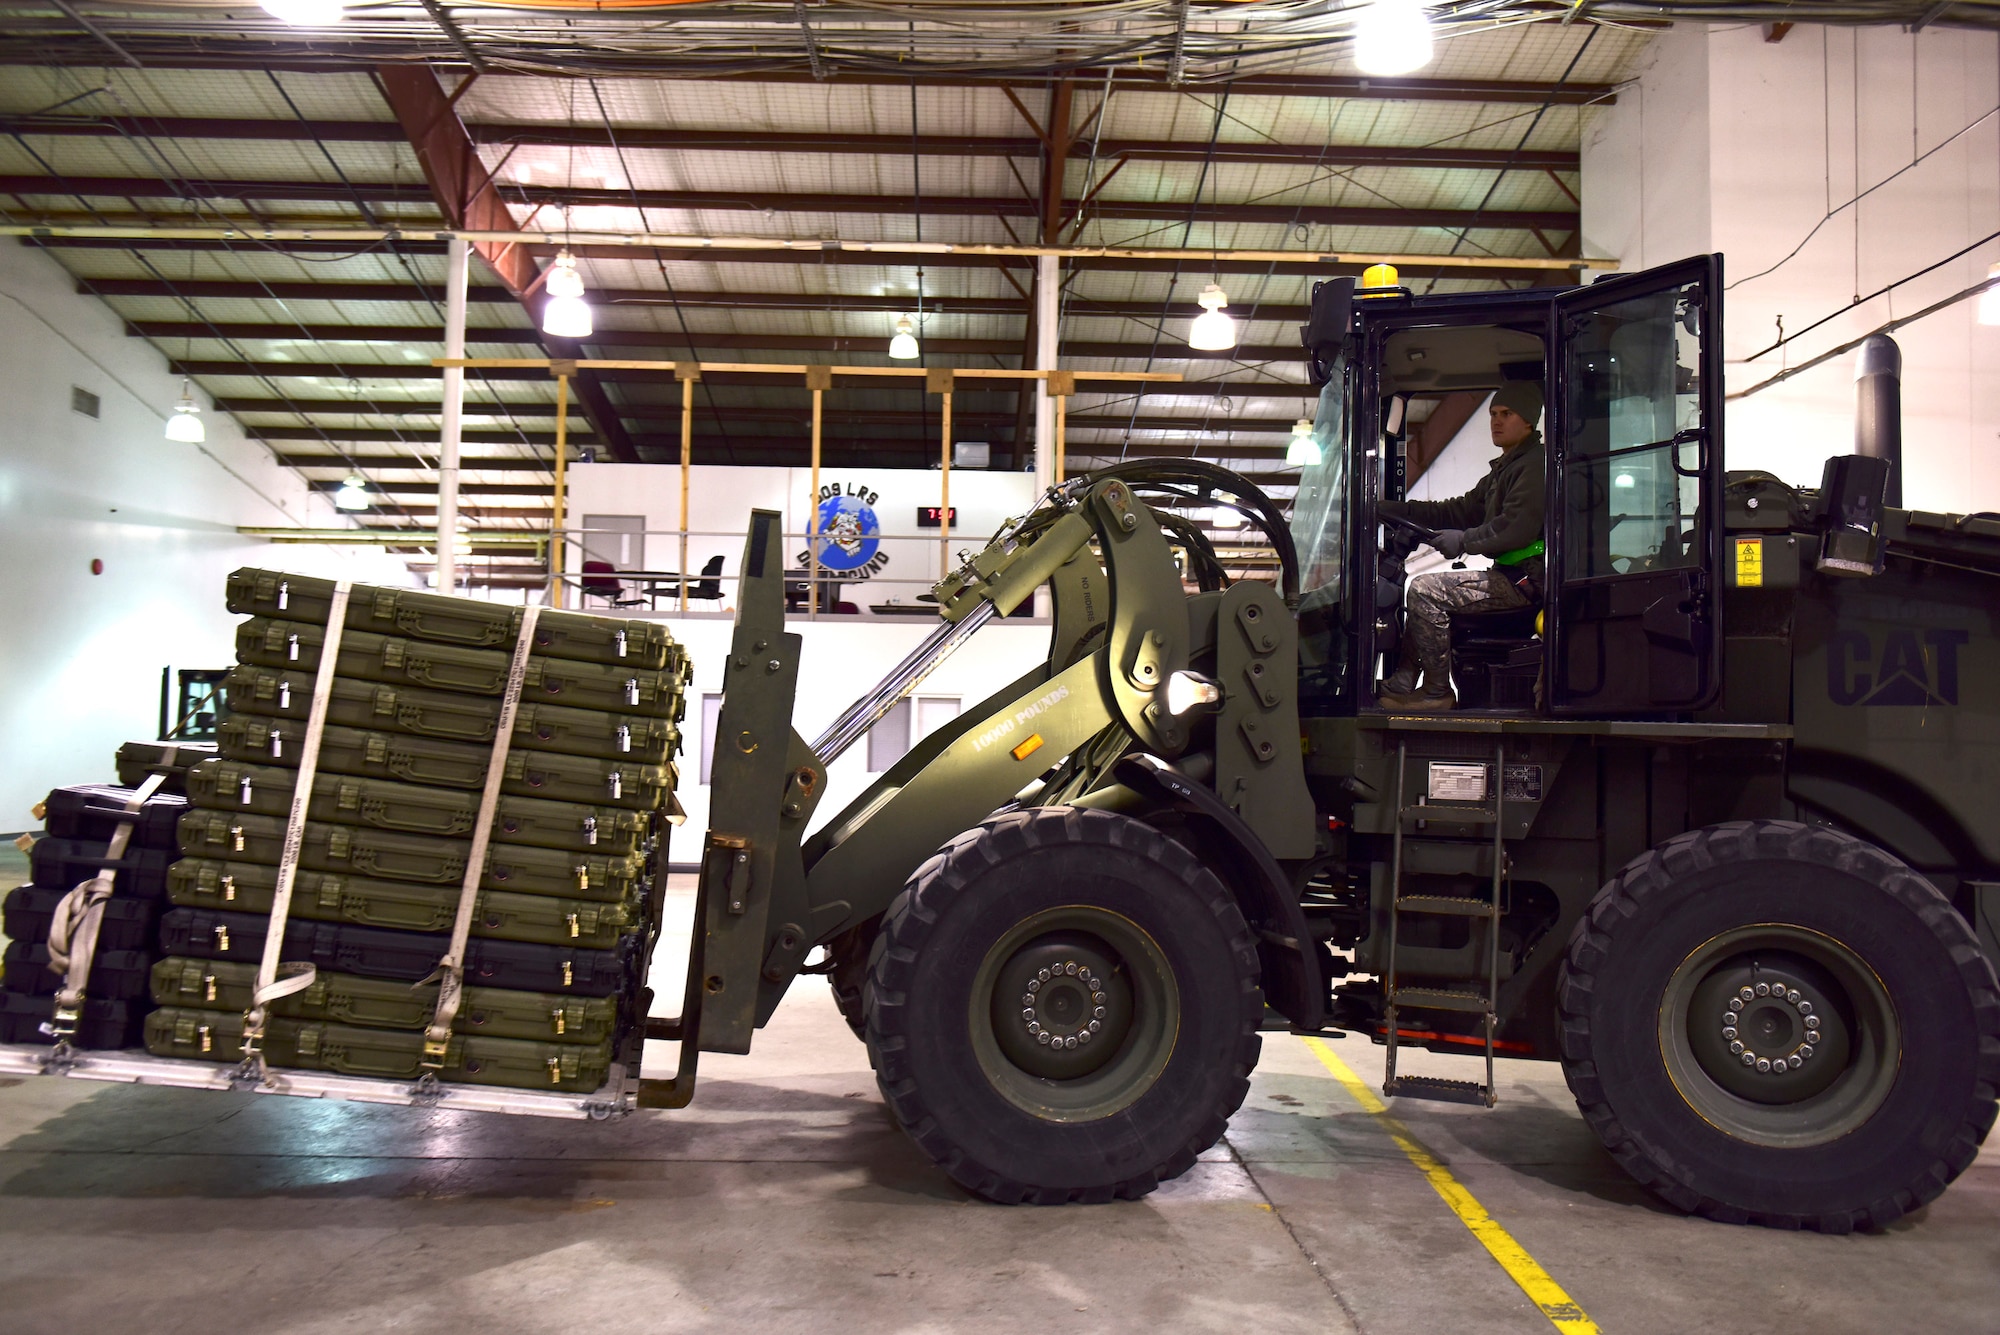 U.S. Air Force Airman 1st Class Tyler Neff, a member of the 509th Logistics Readiness Squadron, transfers weapons with a 10K-AT forklift driver at Whiteman Air Force Base, Mo., Jan. 13, 2018, in support of a 442d Fighter Wing deployment. The 509th and 131st work together to ensure missions, such as deployments and humanitarian efforts, are successful. (U.S. Air Force photo by Staff Sgt. Danielle Quilla)